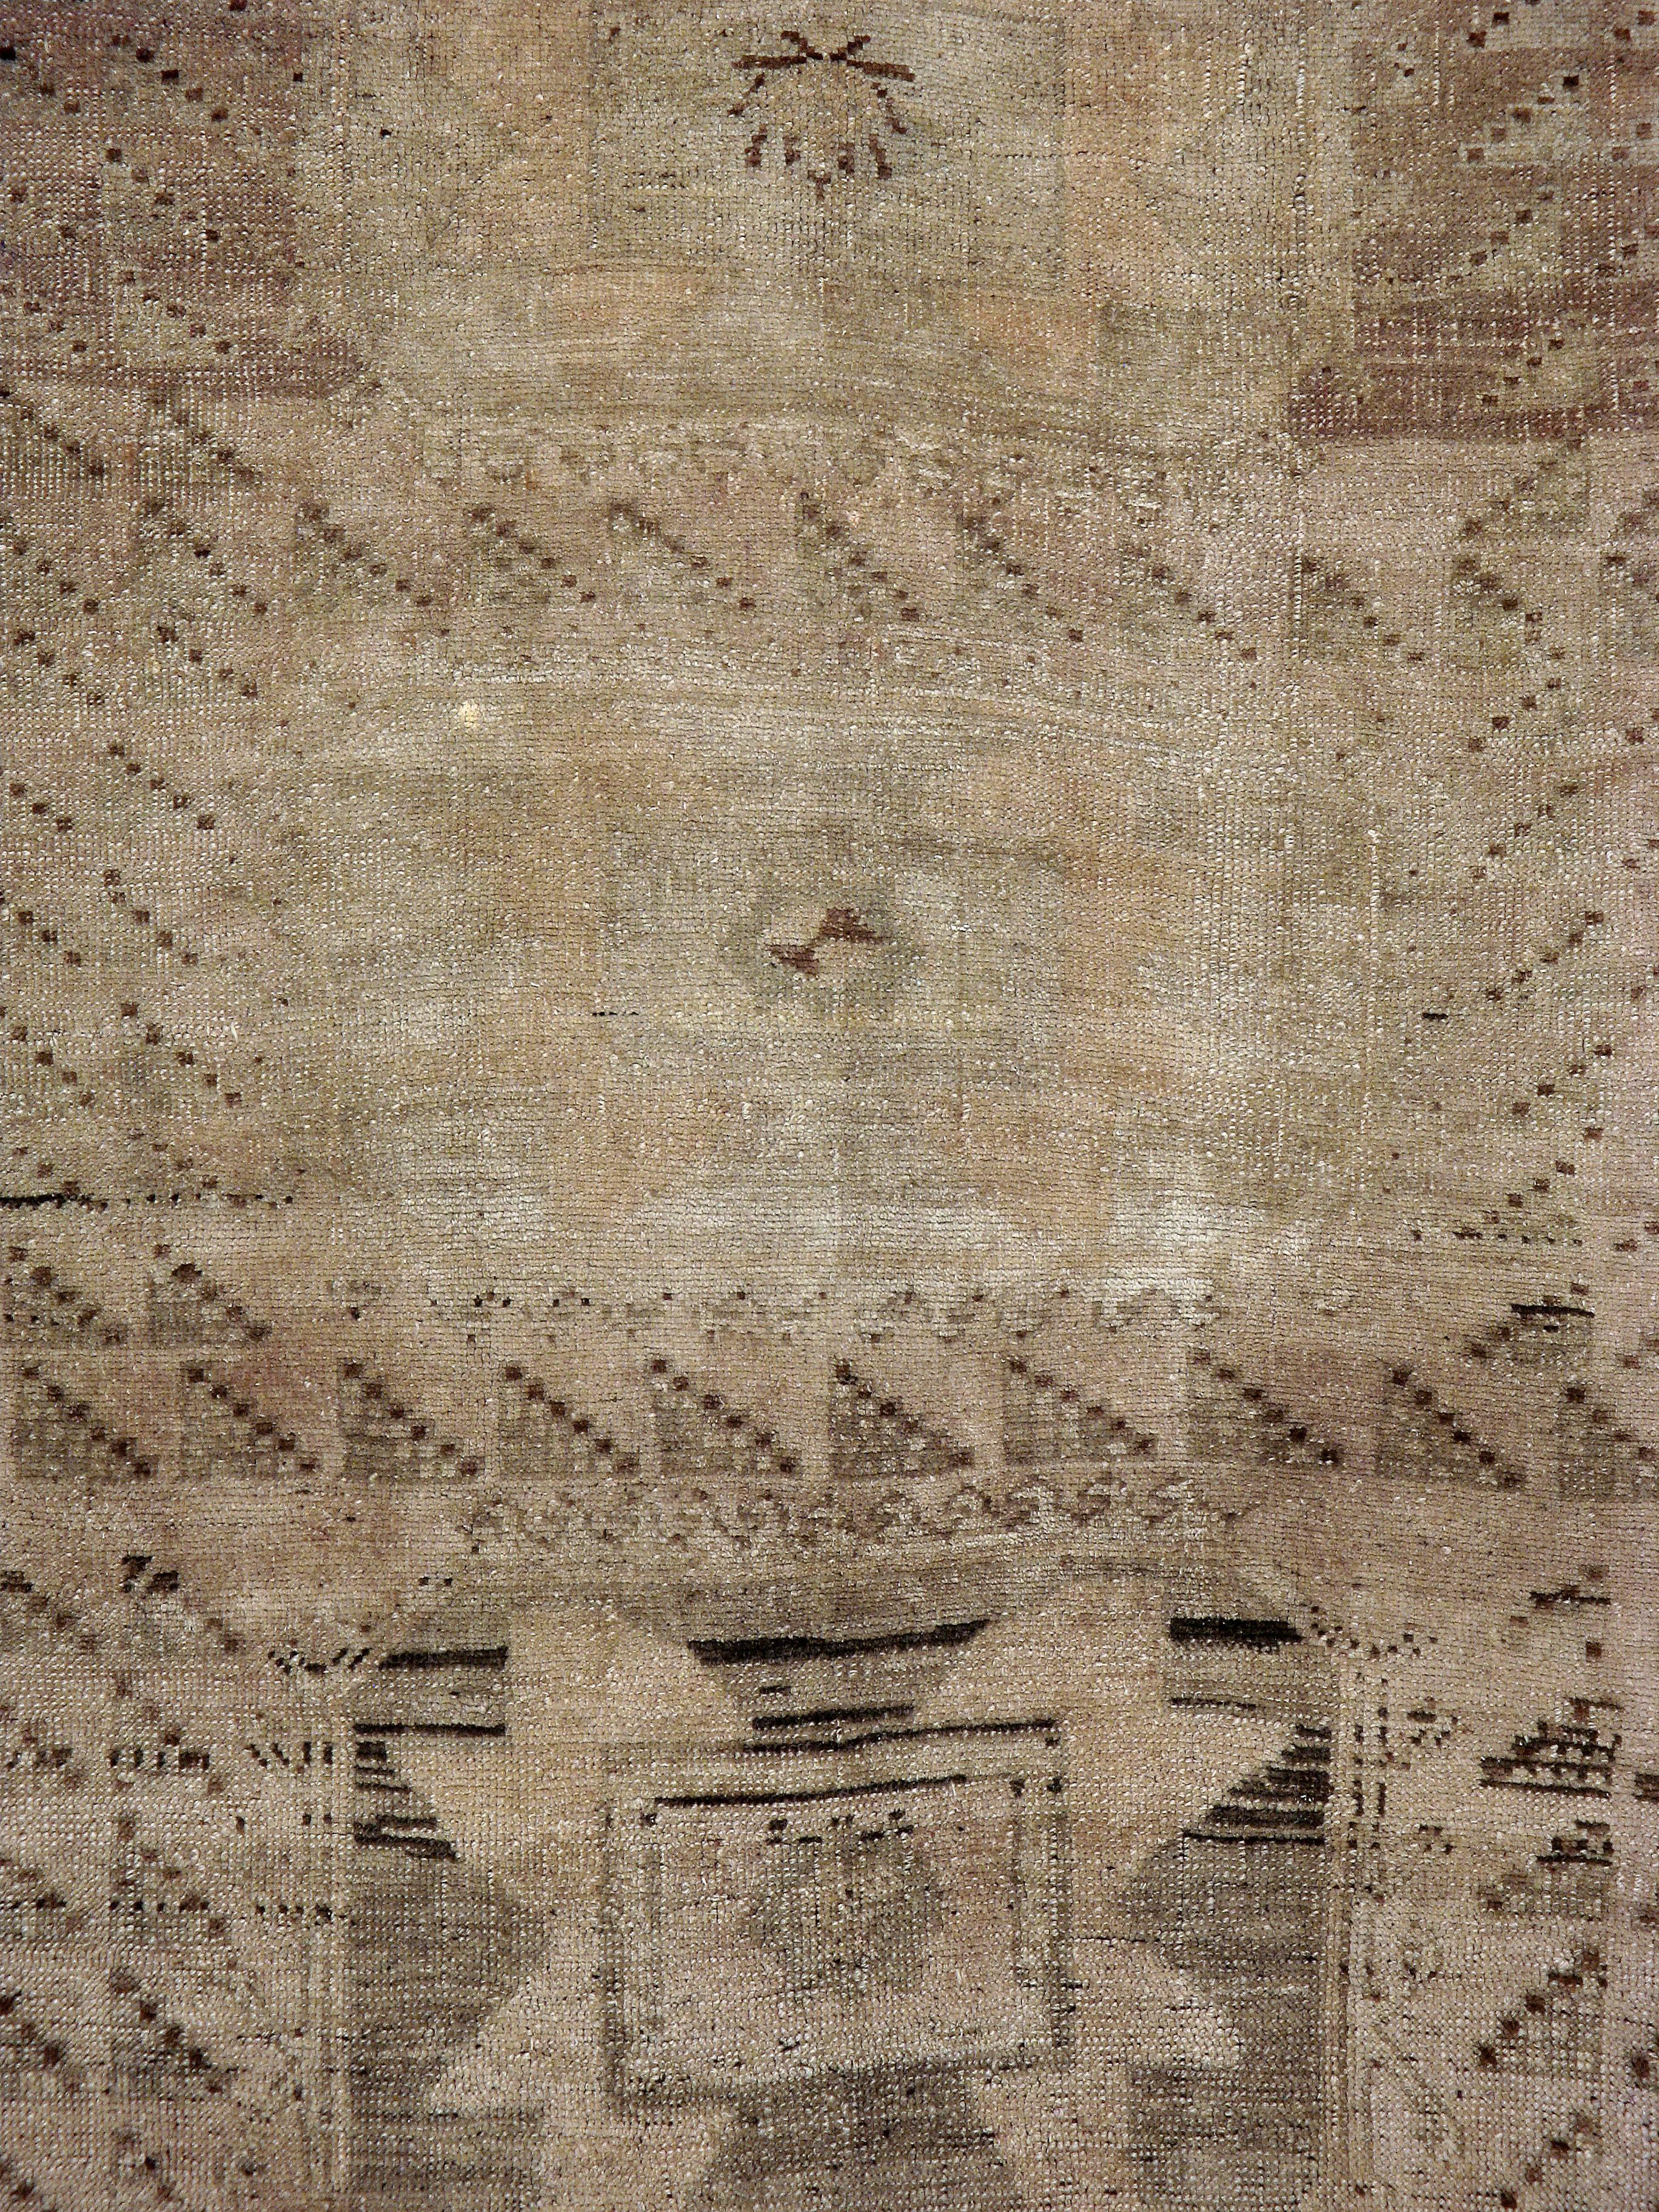 An antique Turkish Oushak Rug from the second quarter of the 20th century.